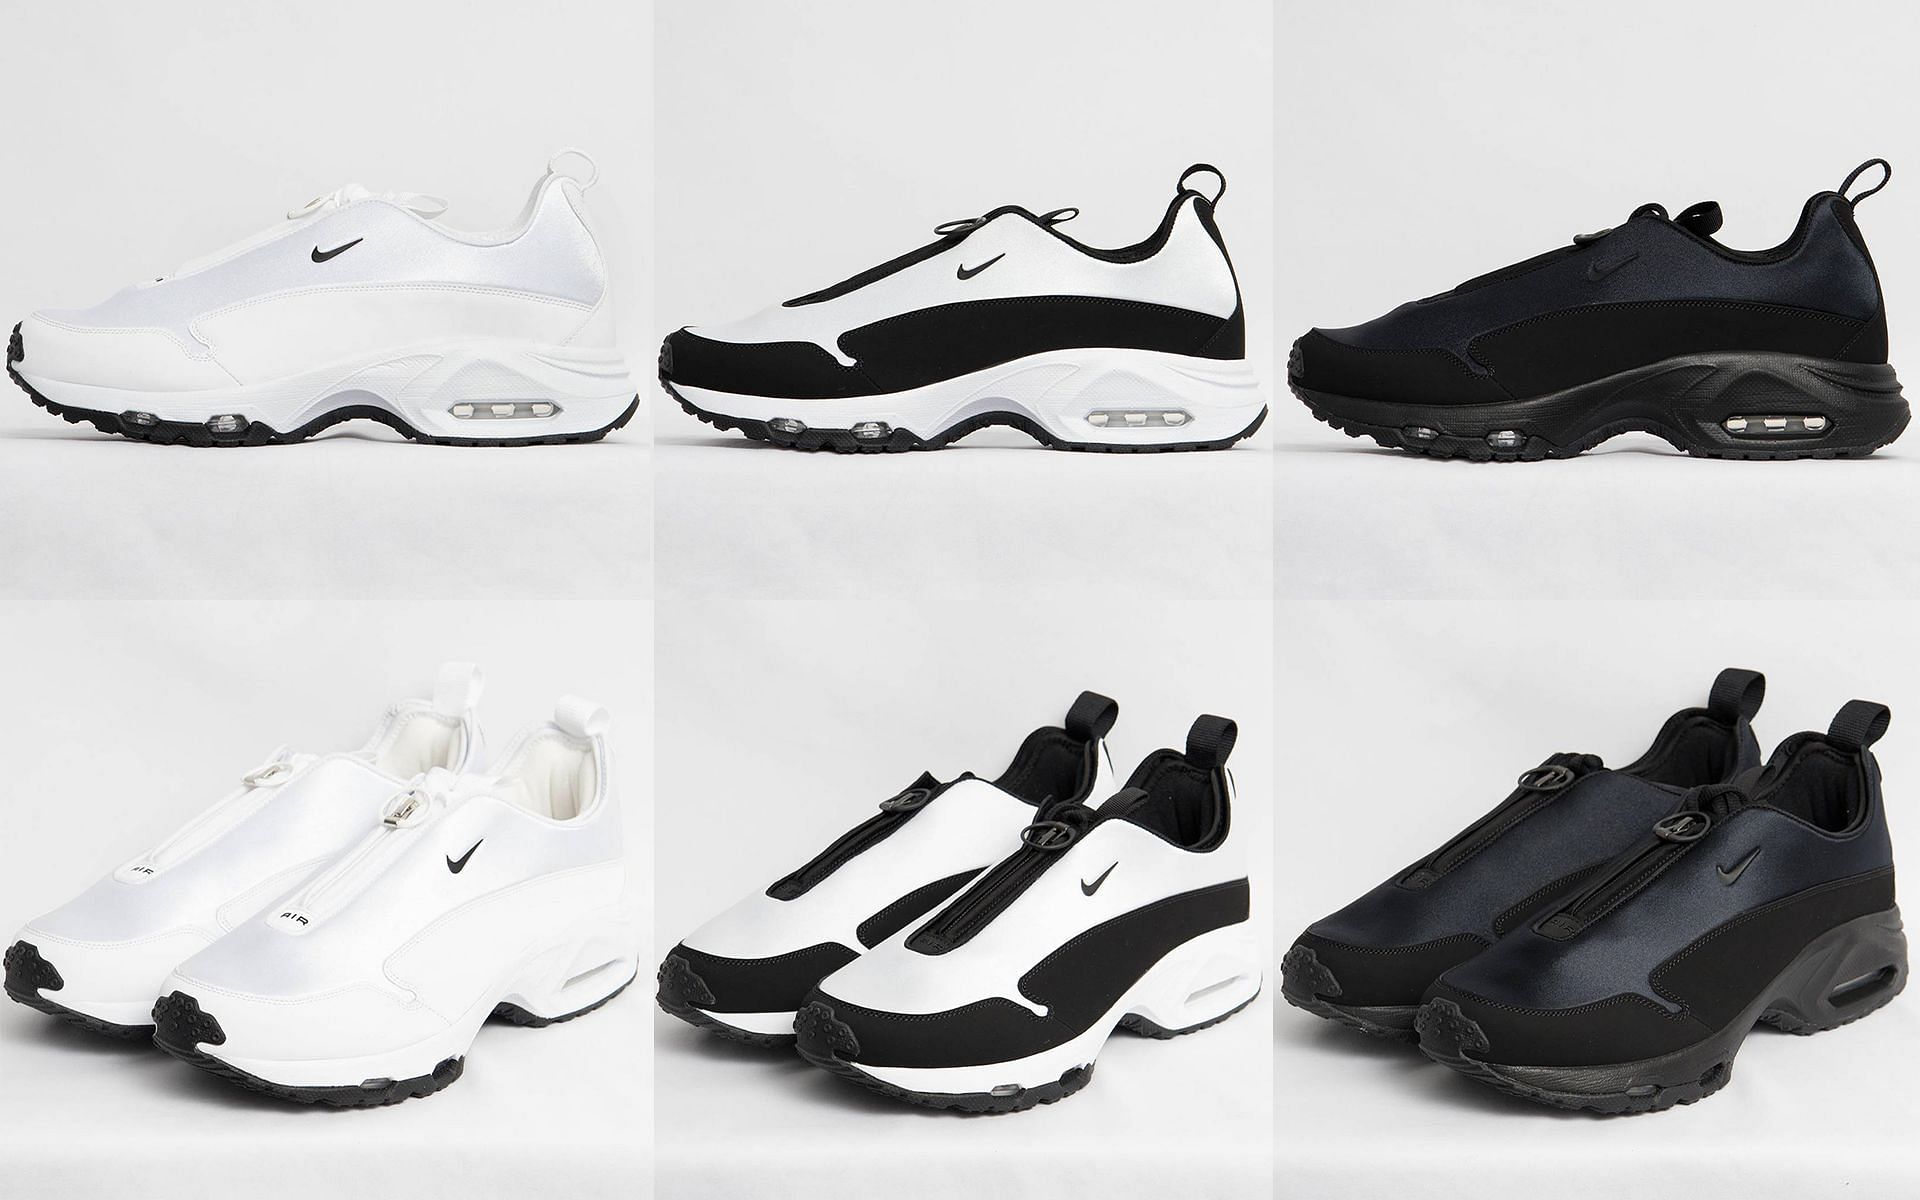 COMME des GARCONS HOMME x Nike Air Max Sunder Sp shoes collection (Image via Sportskeeda)